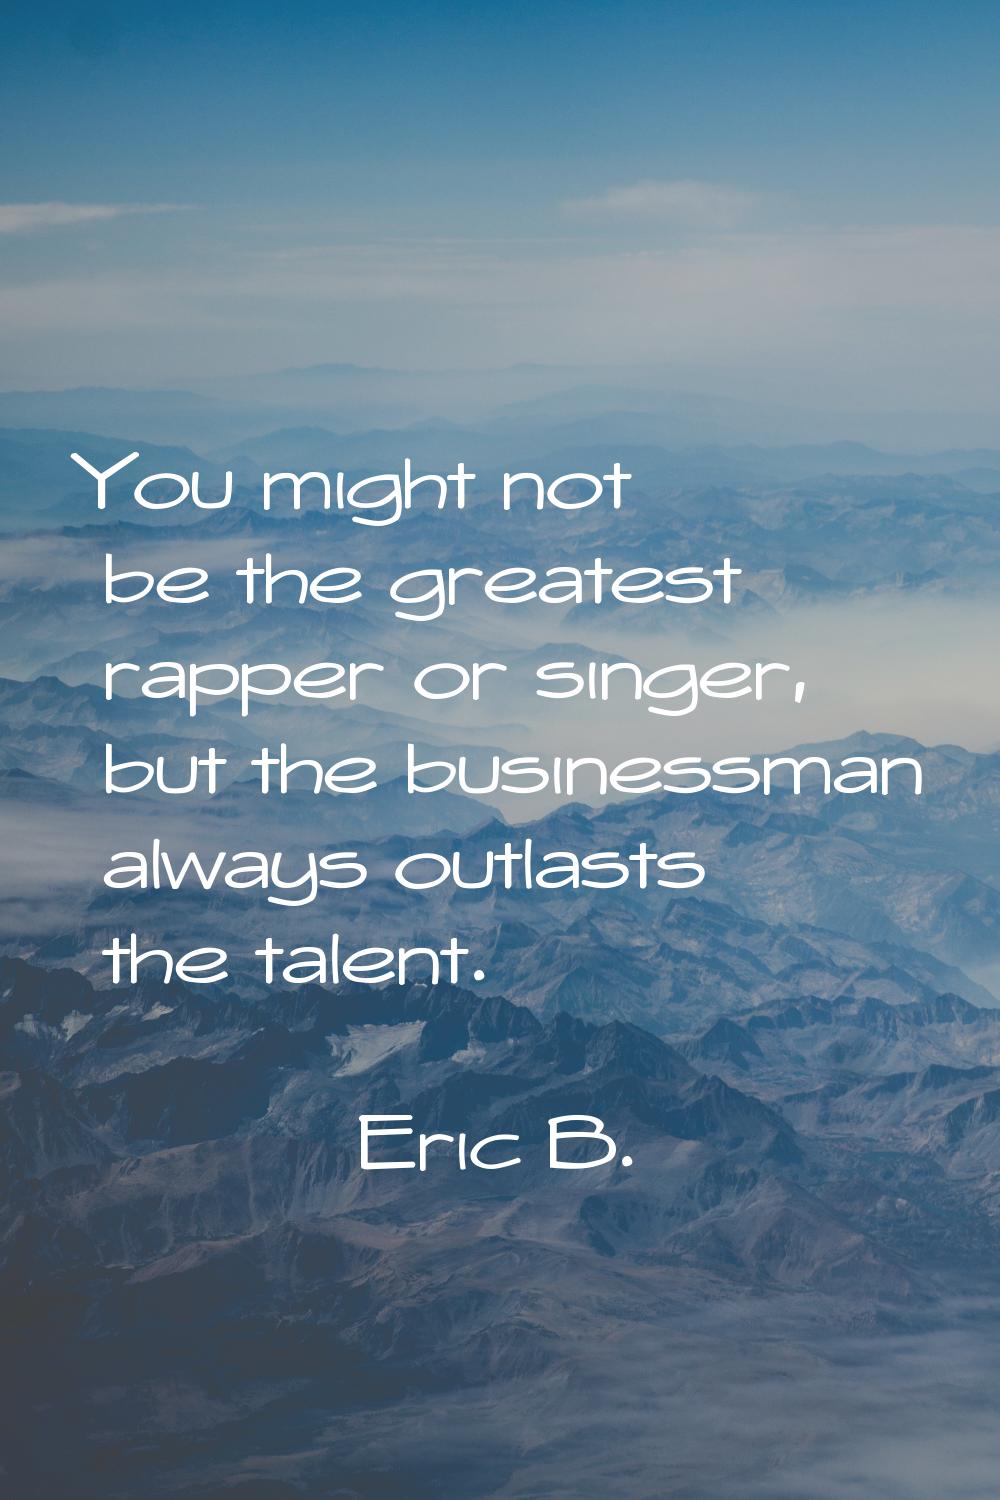 You might not be the greatest rapper or singer, but the businessman always outlasts the talent.